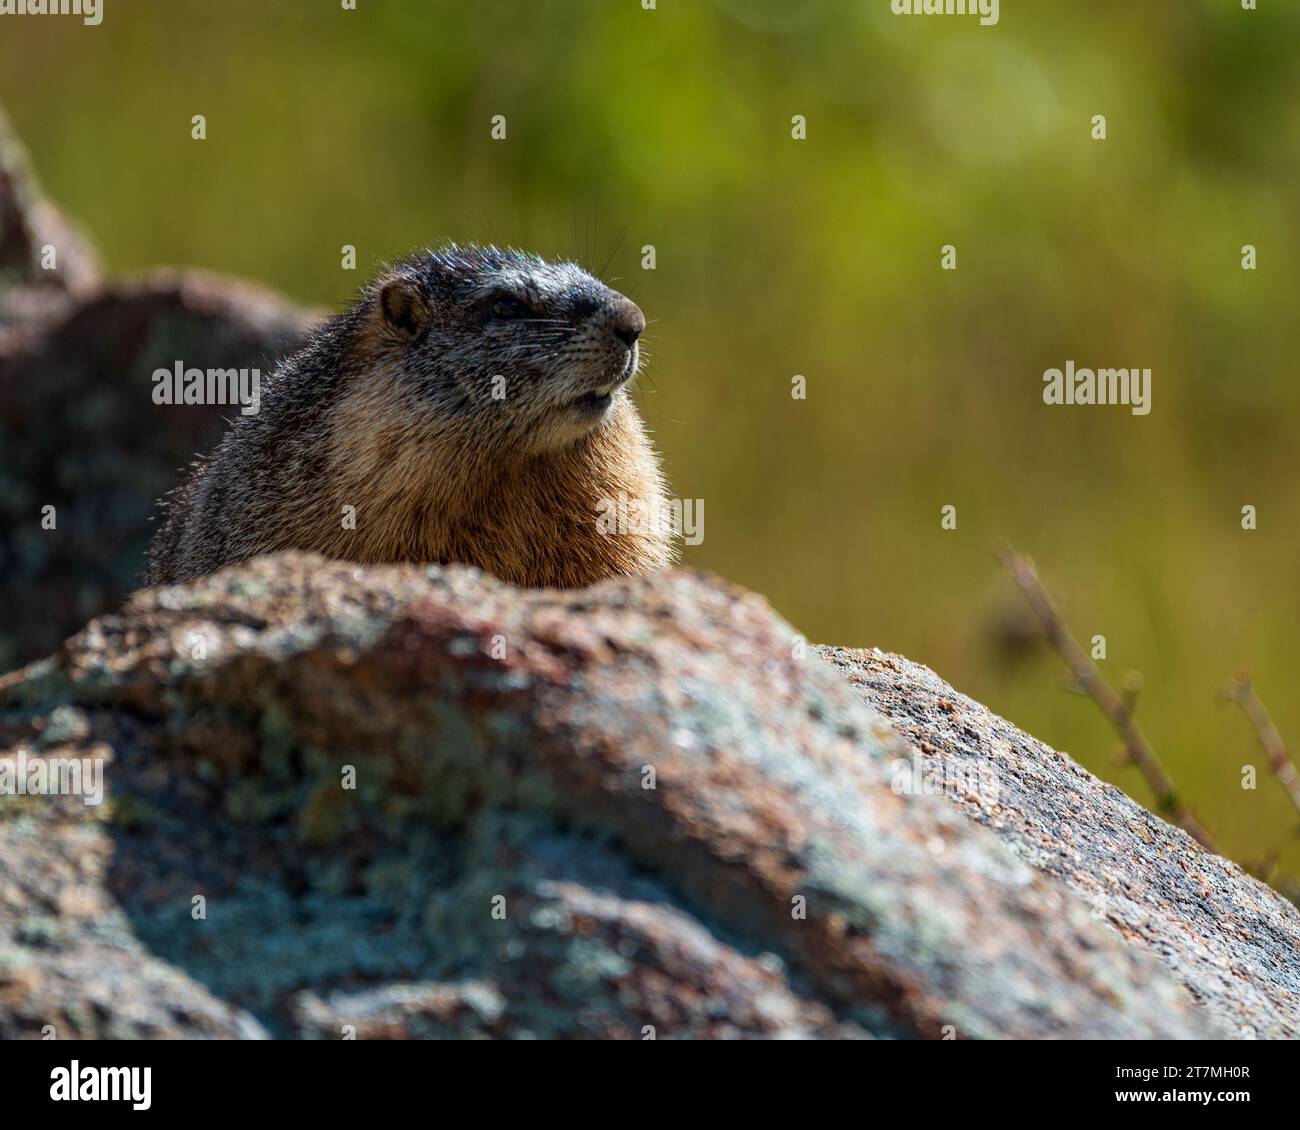 Yellow-bellied Marmot Perched on Rock in Rocky Mountain National Park Stock Photo